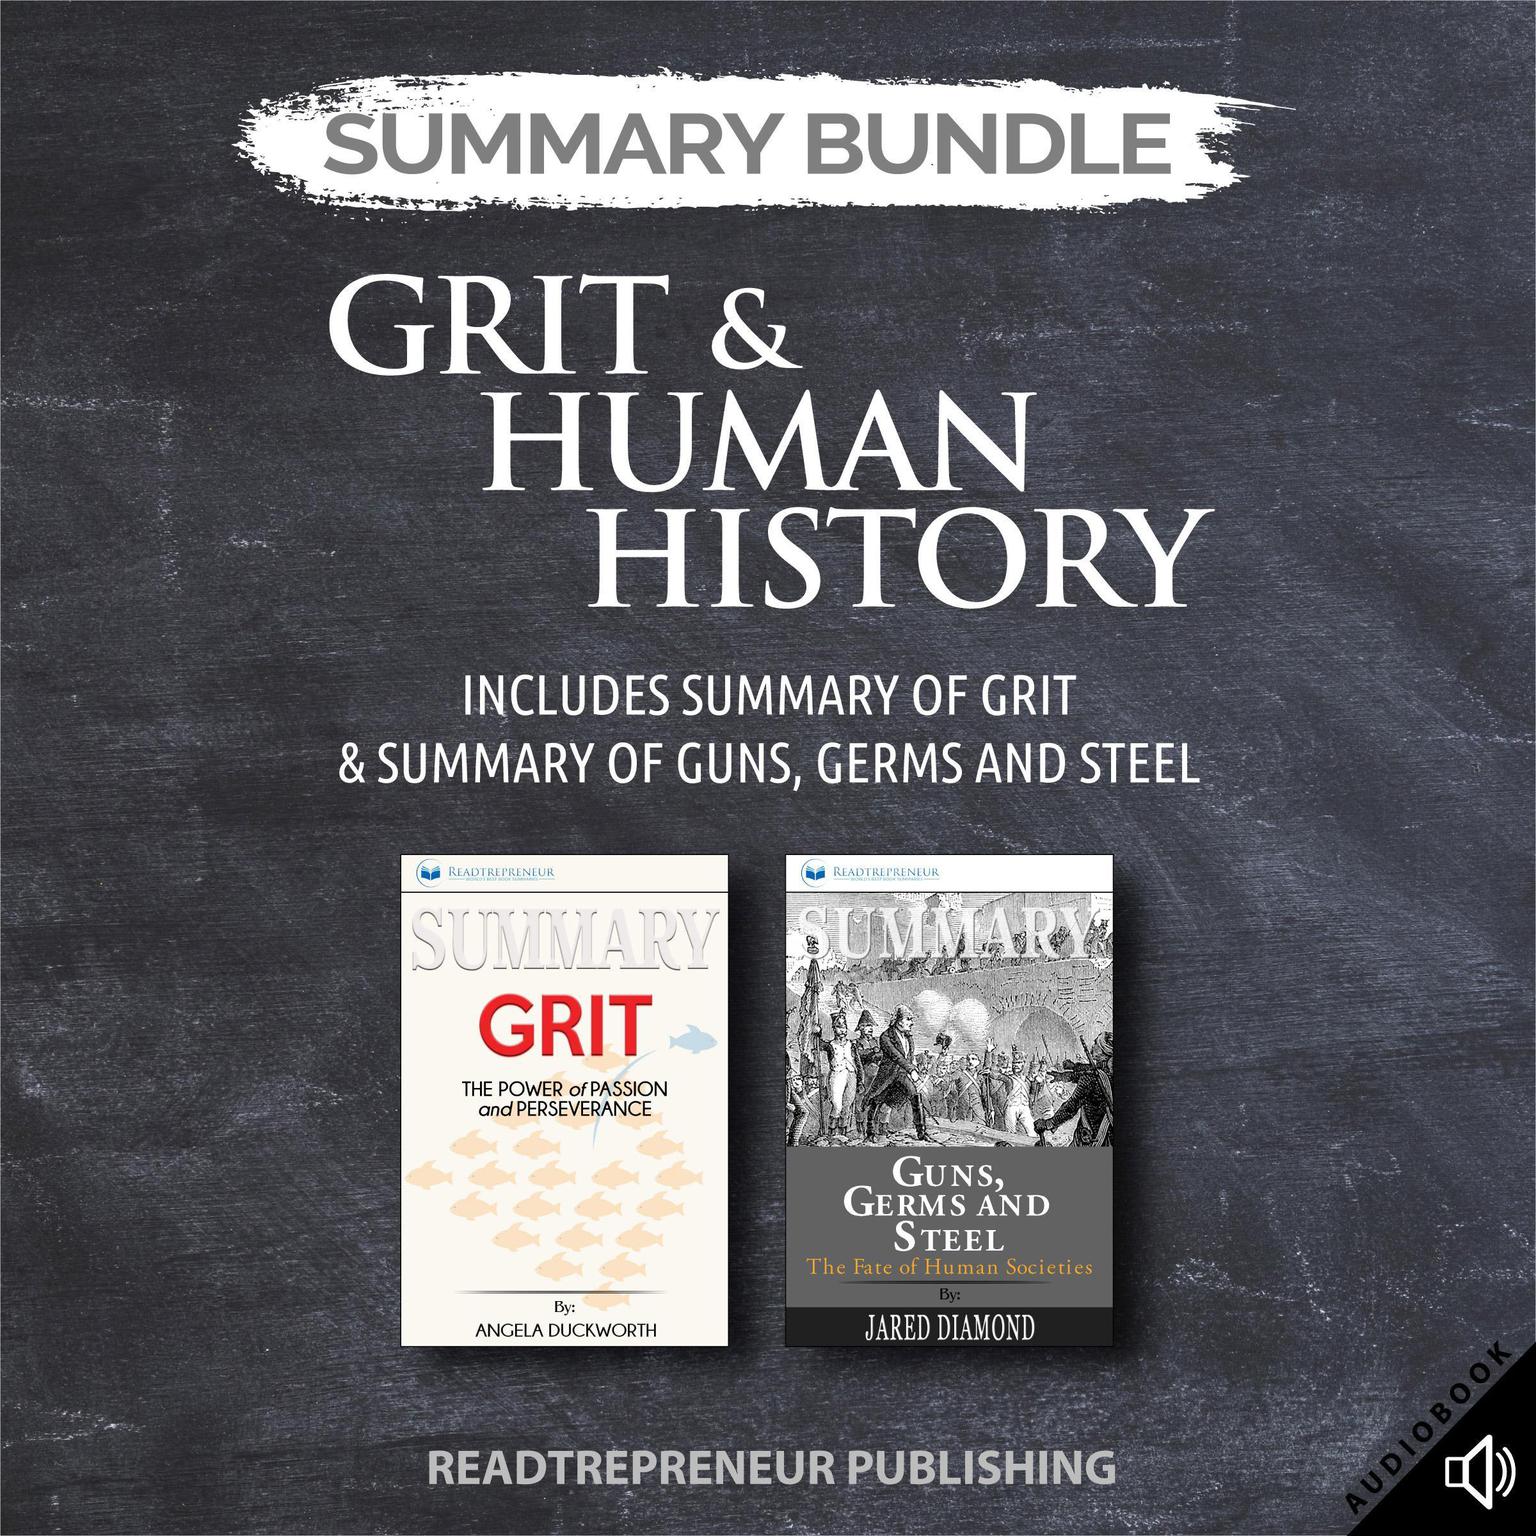 Summary Bundle: Grit & Human History | Readtrepreneur Publishing: Includes Summary of Grit & Summary of Guns, Germs and Steel Audiobook, by Readtrepreneur Publishing